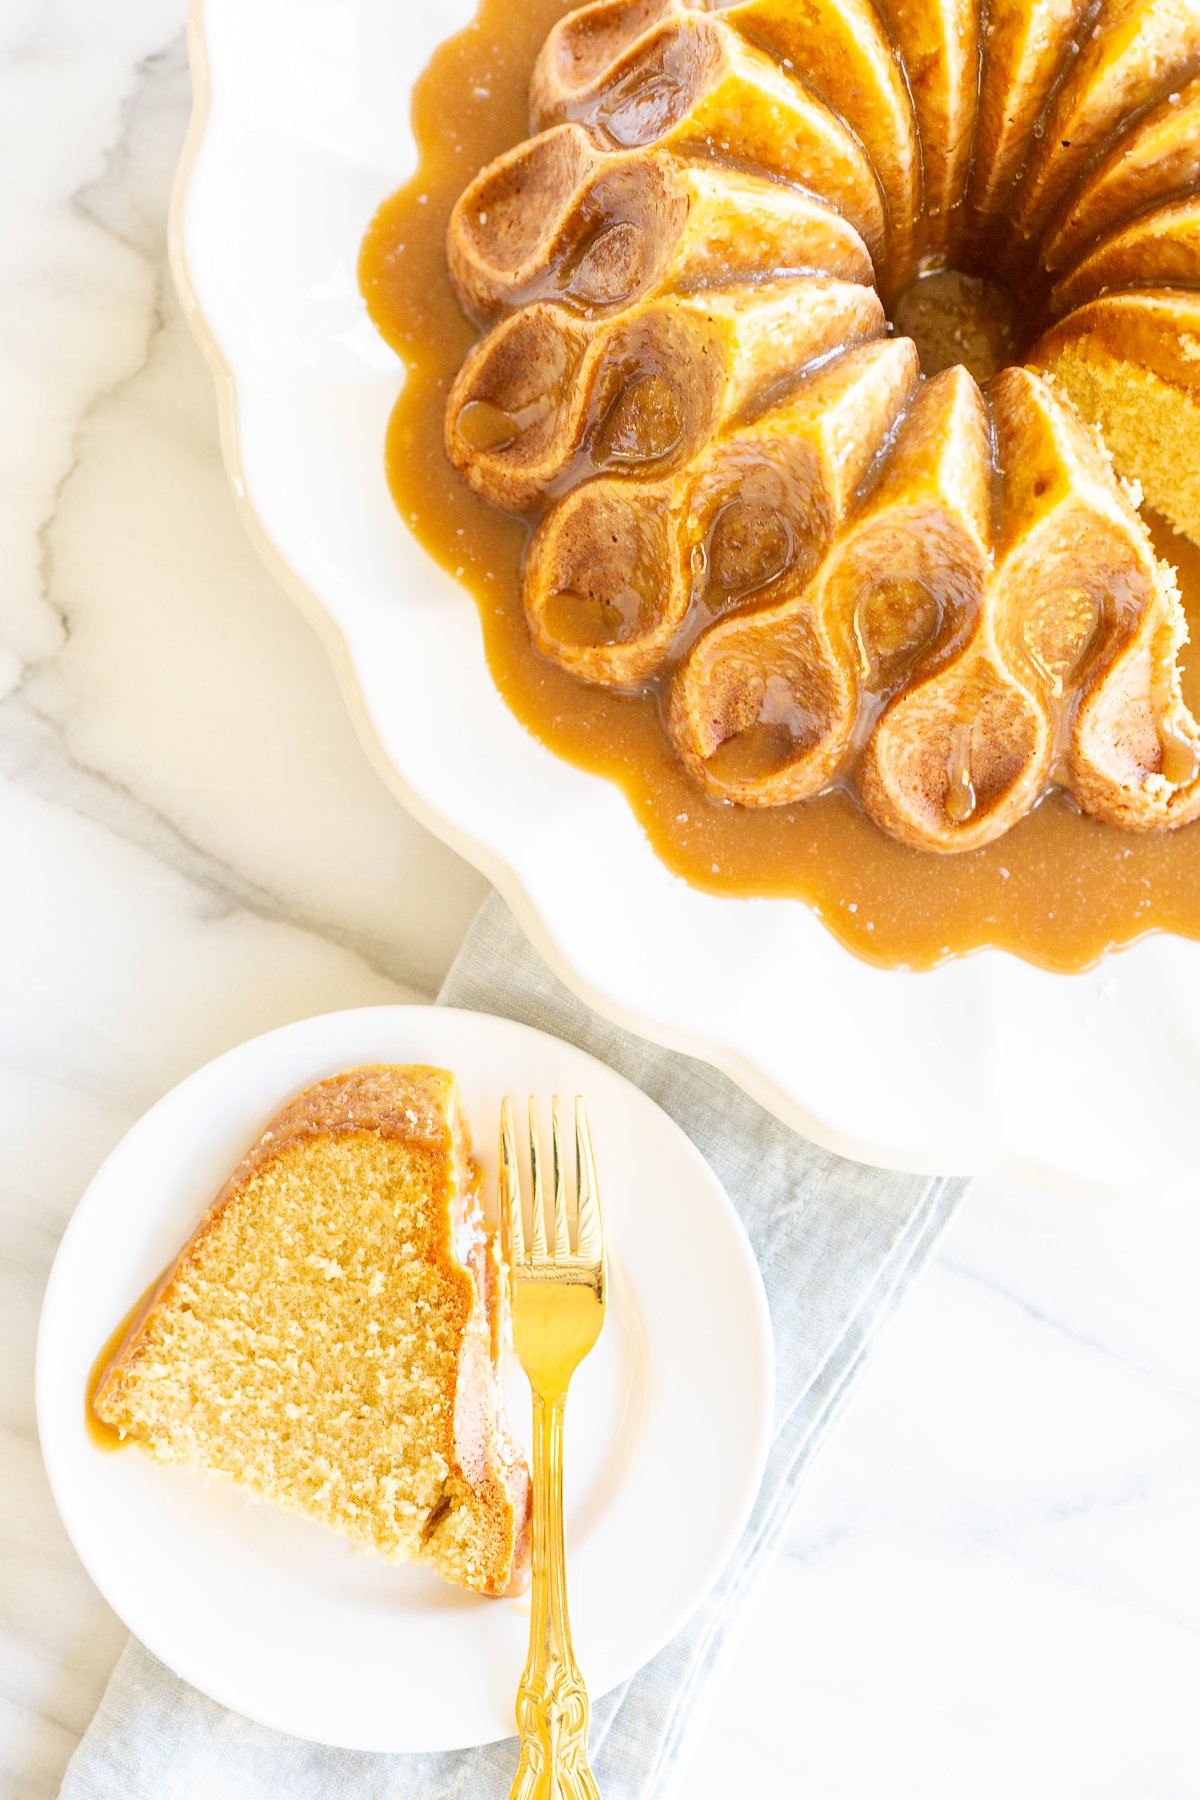 A slice of brown sugar caramel pound cake on a white plate, with the bundt cake in the background.